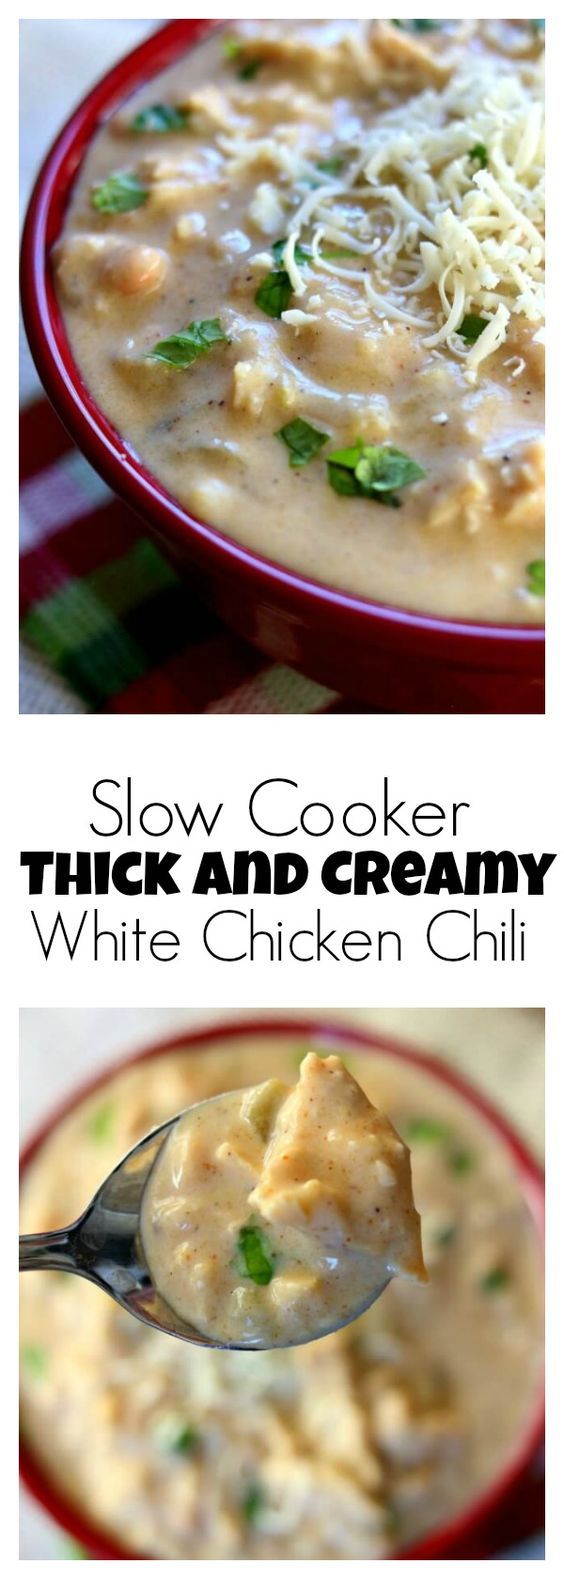 SLOW COOKER THICK AND CREAMY WHITE CHICKEN CHILI RECIPES